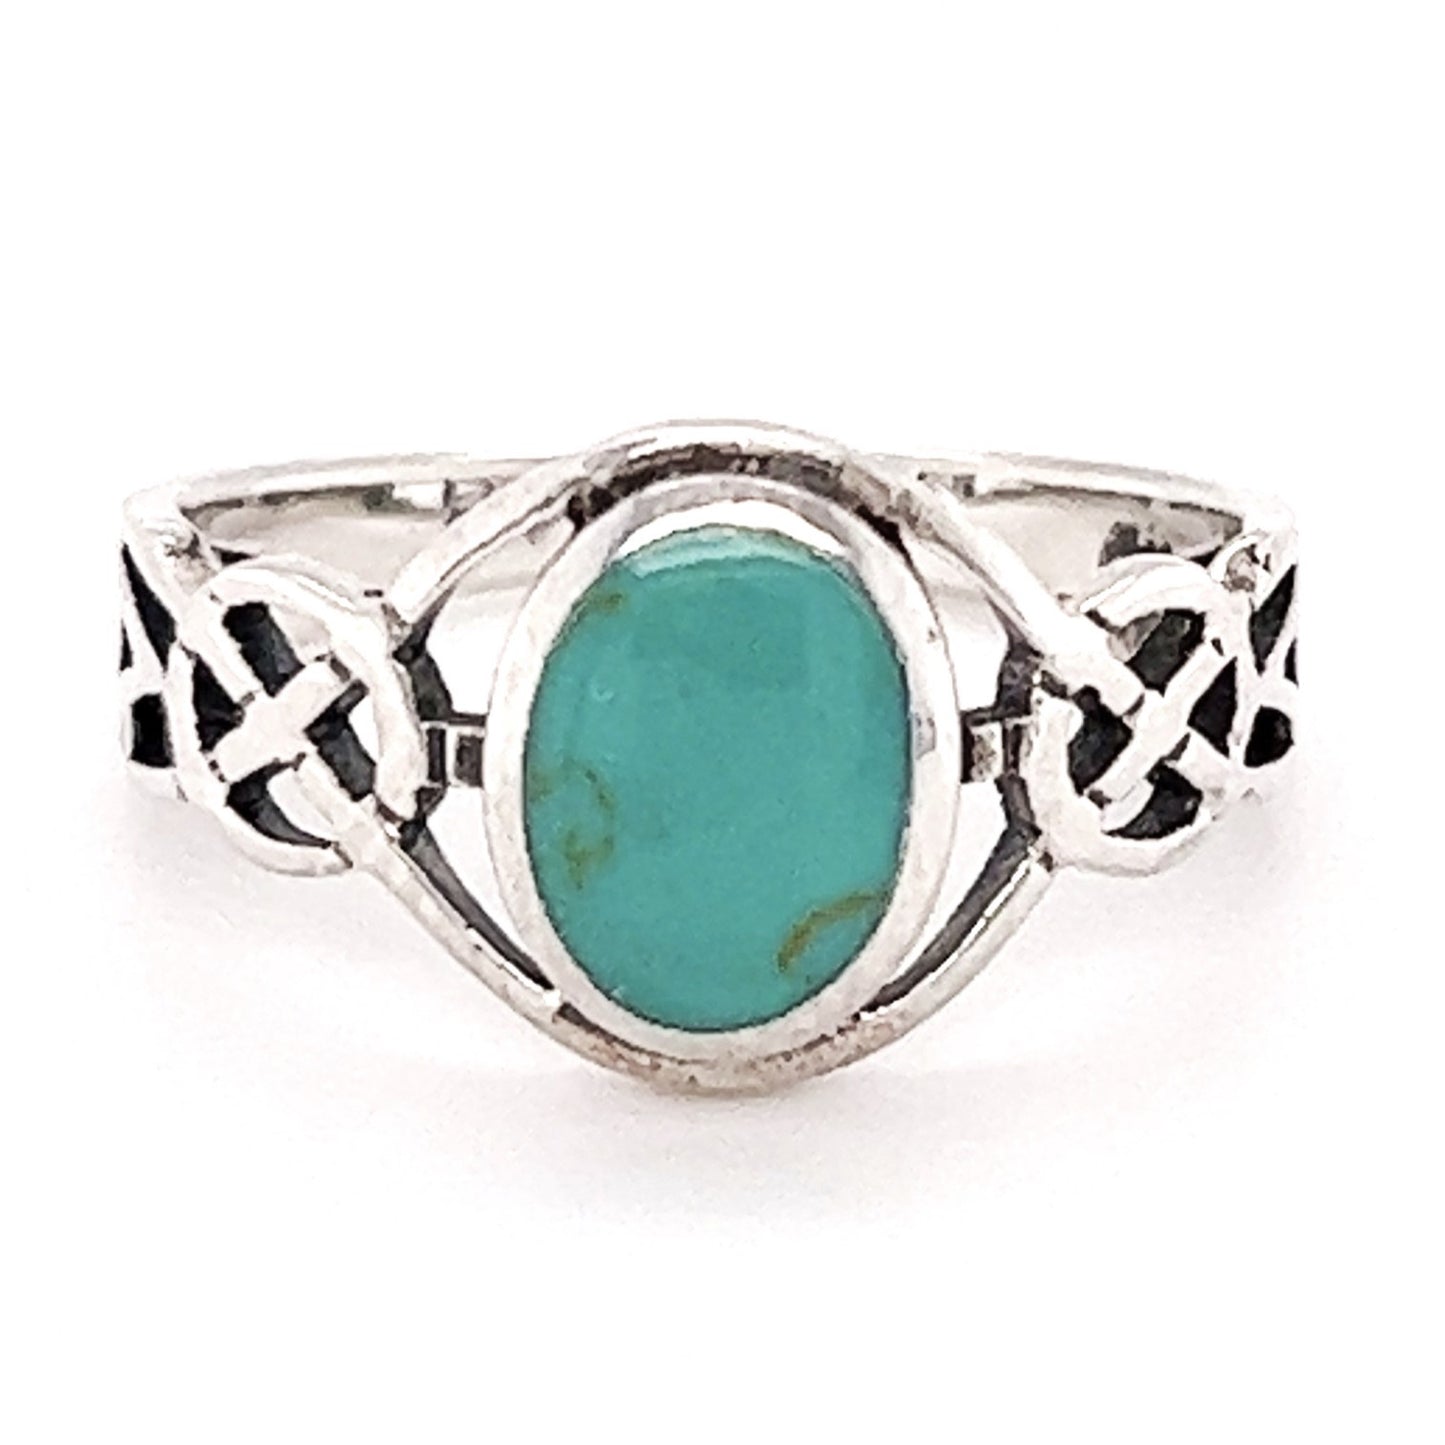 Silver ring with an Inlay Turquoise Braided Knot design.